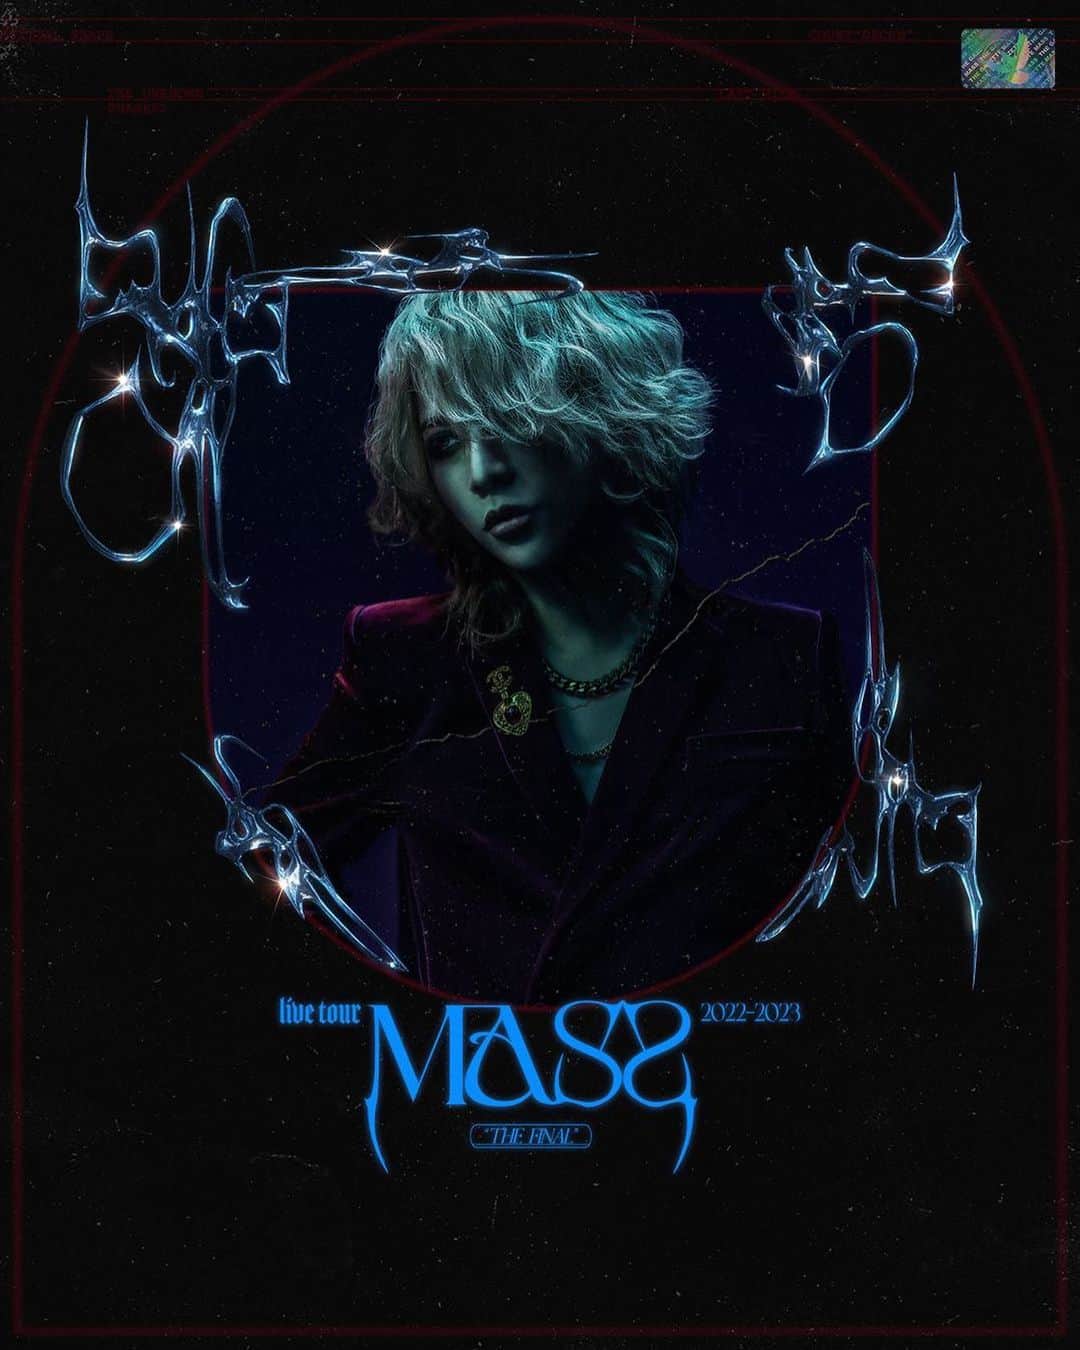 RUKI さんのインスタグラム写真 - (RUKI Instagram)「【MASS "THE FINAL" 日本武道館公演の最新ビジュアル解禁！】  2023年7月15日(土)、日本武道館にて開催される 『the GazettE LIVE TOUR2022-2023 MASS "THE FINAL”』 の最新ビジュアルが解禁✨  本日より本公演チケットのFC.HERESY 2次先行受付・プレイガイド先行受付もスタート🎫 この機会に是非ご利用ください！  the GazettE 10th ALBUM『MASS』の集大成。 その目に焼き付けて、共に最高の夜を過ごしましょう🔥  ■the GazettE LIVE TOUR2022-2023 MASS "THE FINAL" 2023年7月15日(土) 日本武道館 OPEN16:30/START17:30  [チケット情報] 全席指定 前売￥9,600(税込) ※未就学児入場不可、諸サービス手数料別  ▼チケット情報等の詳細は公演特設ページをチェック！ https://the-gazette.com/2023_mass_thefinal/  ＝＝＝＝＝＝＝  【The new visual for MASS "THE FINAL" at Nippon Budokan concert has been unveiled!】  It will be held at Nippon Budokan on Saturday, July 15, 2023. 『the GazettE LIVE TOUR2022-2023 MASS "THE FINAL"』 The new visual has been unveiled!  From today, FC.HERESY 2nd pre-registration and play guide pre-registration for this live ticket will also start! ! Please take advantage of this opportunity!  The culmination of the GazettE 10th ALBUM "MASS". Burn it into your eyes and let's spend the best night together!  ■the GazettE LIVE TOUR2022-2023 MASS "THE FINAL" July 15th (Sat), 2023 Nippon Budokan OPEN16:30/START17:30  [TICKET INFORMATION] All seats reserved : Advance ¥9,600(tax included) *No admission for preschool children. *Service fee not included.  ▼For ticket information, please check the special page! https://the-gazette.com/2023_mass_thefinal/  #theGazettE #TOURFINAL #MASS #日本武道館」5月26日 20時05分 - ruki_nilduenilun